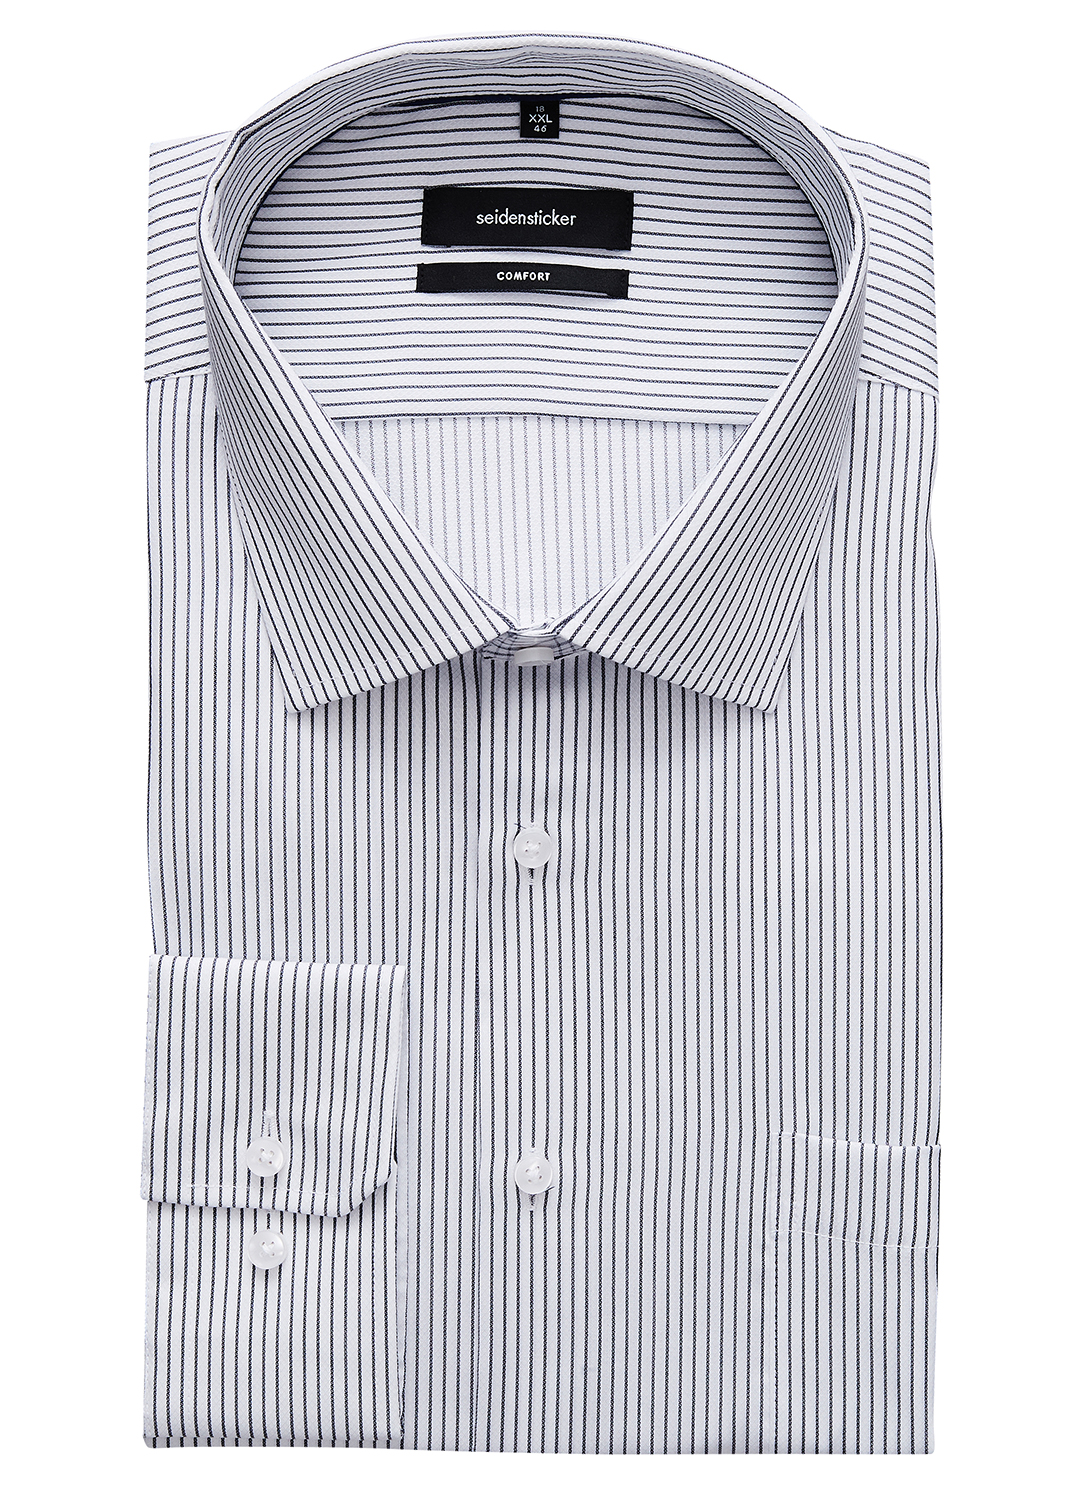 Navy Stripe Business Shirt - High and Mighty Menswear